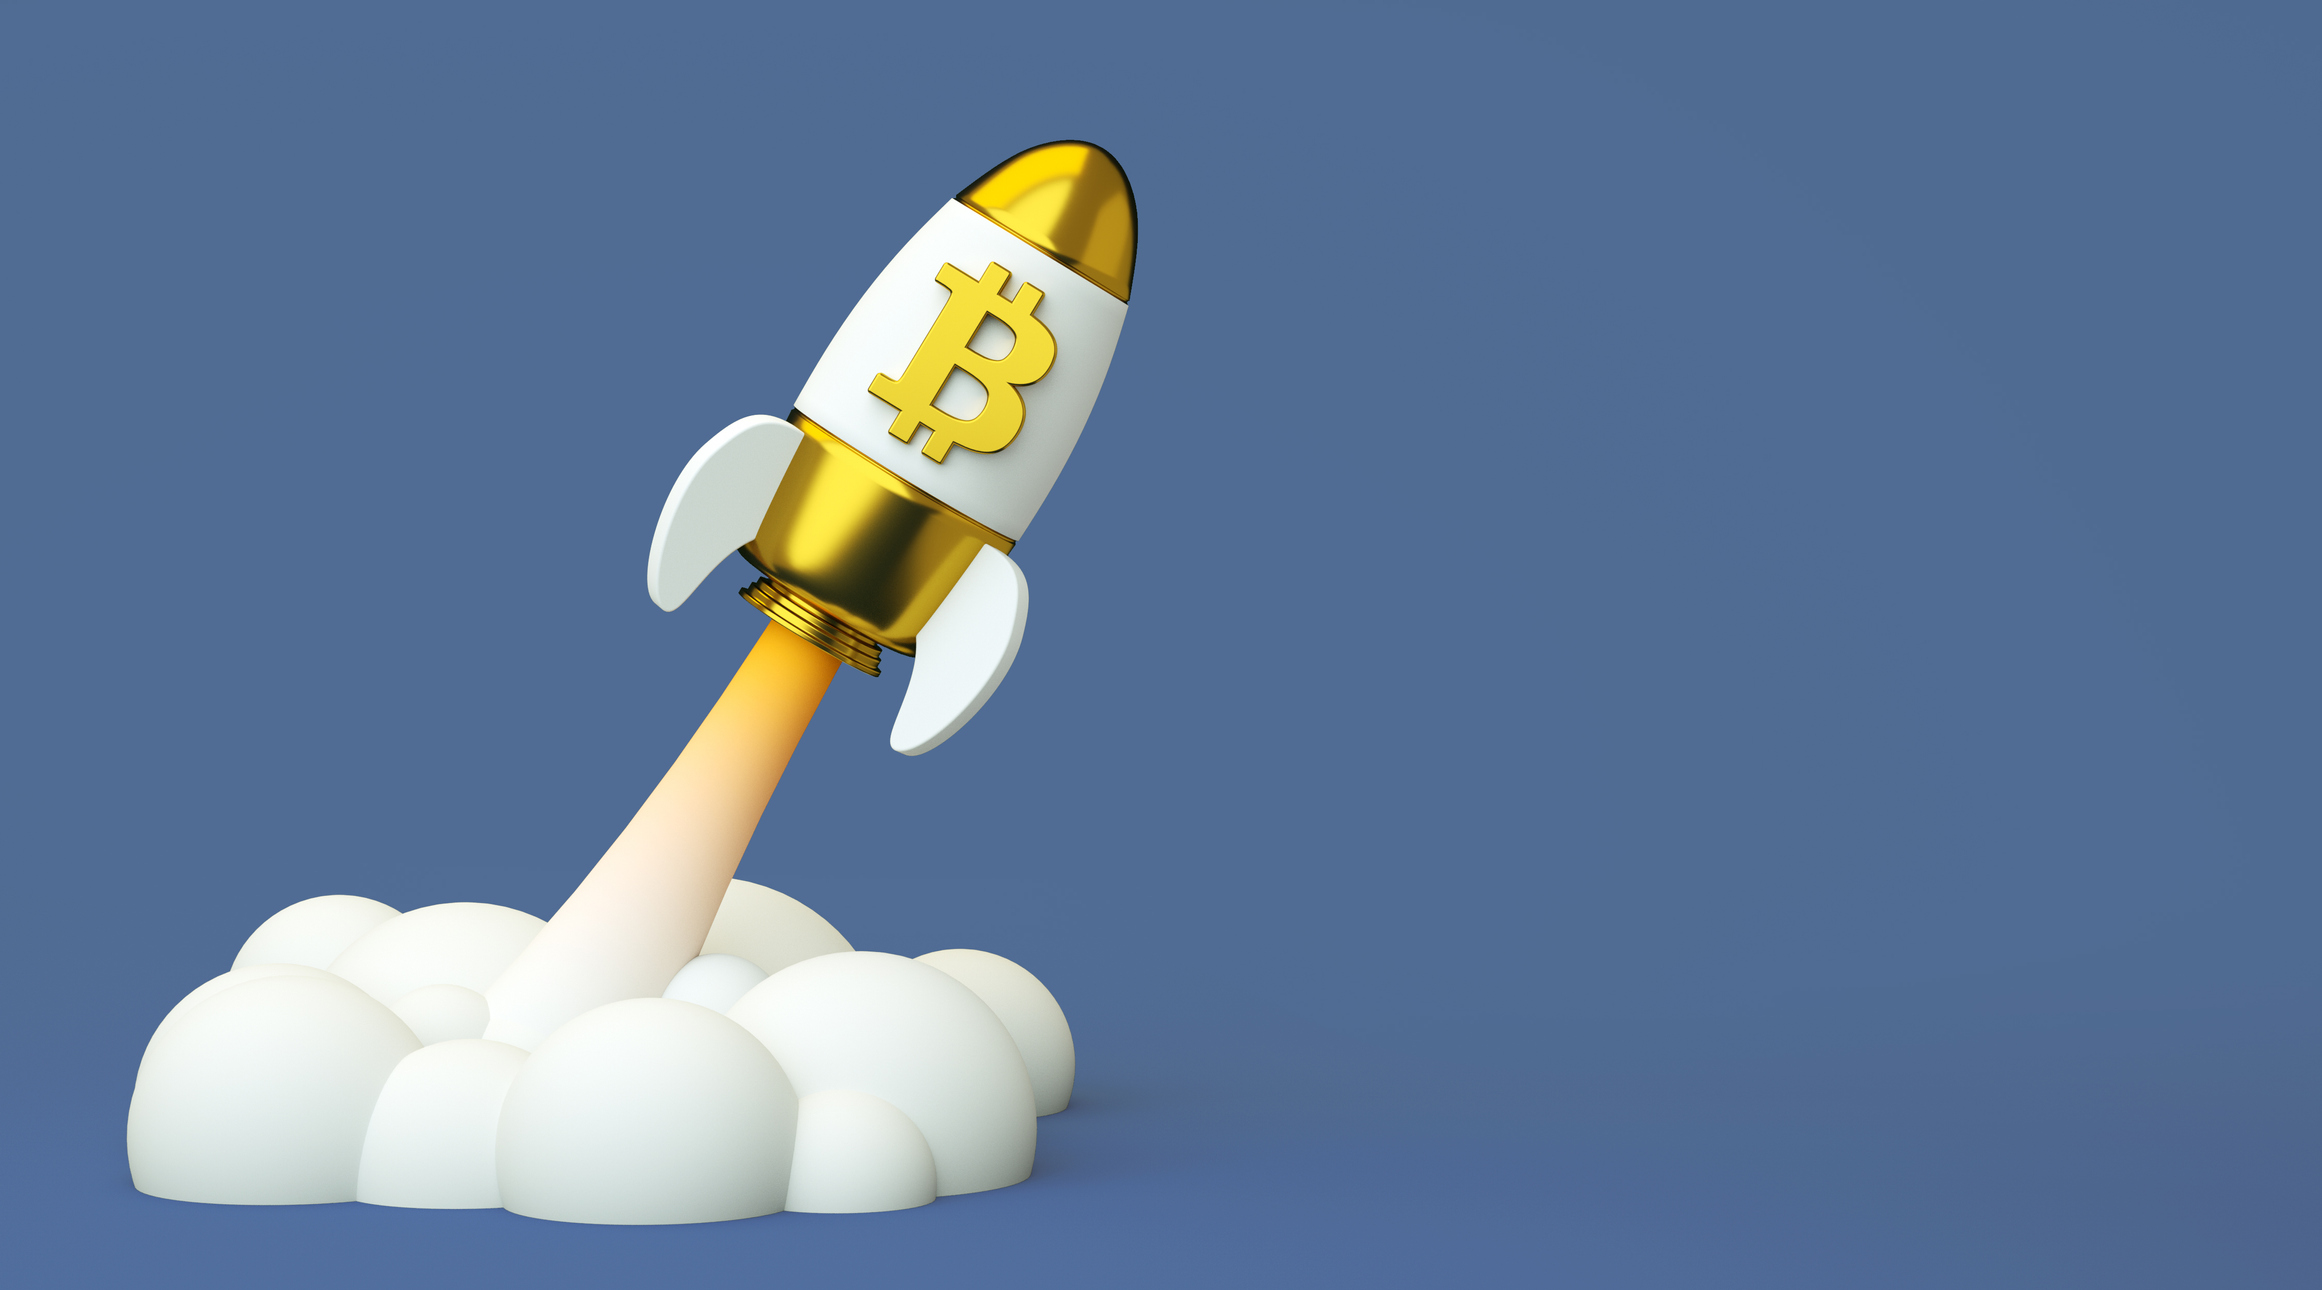 A toy rocket with the Bitcoin logo blasts off.